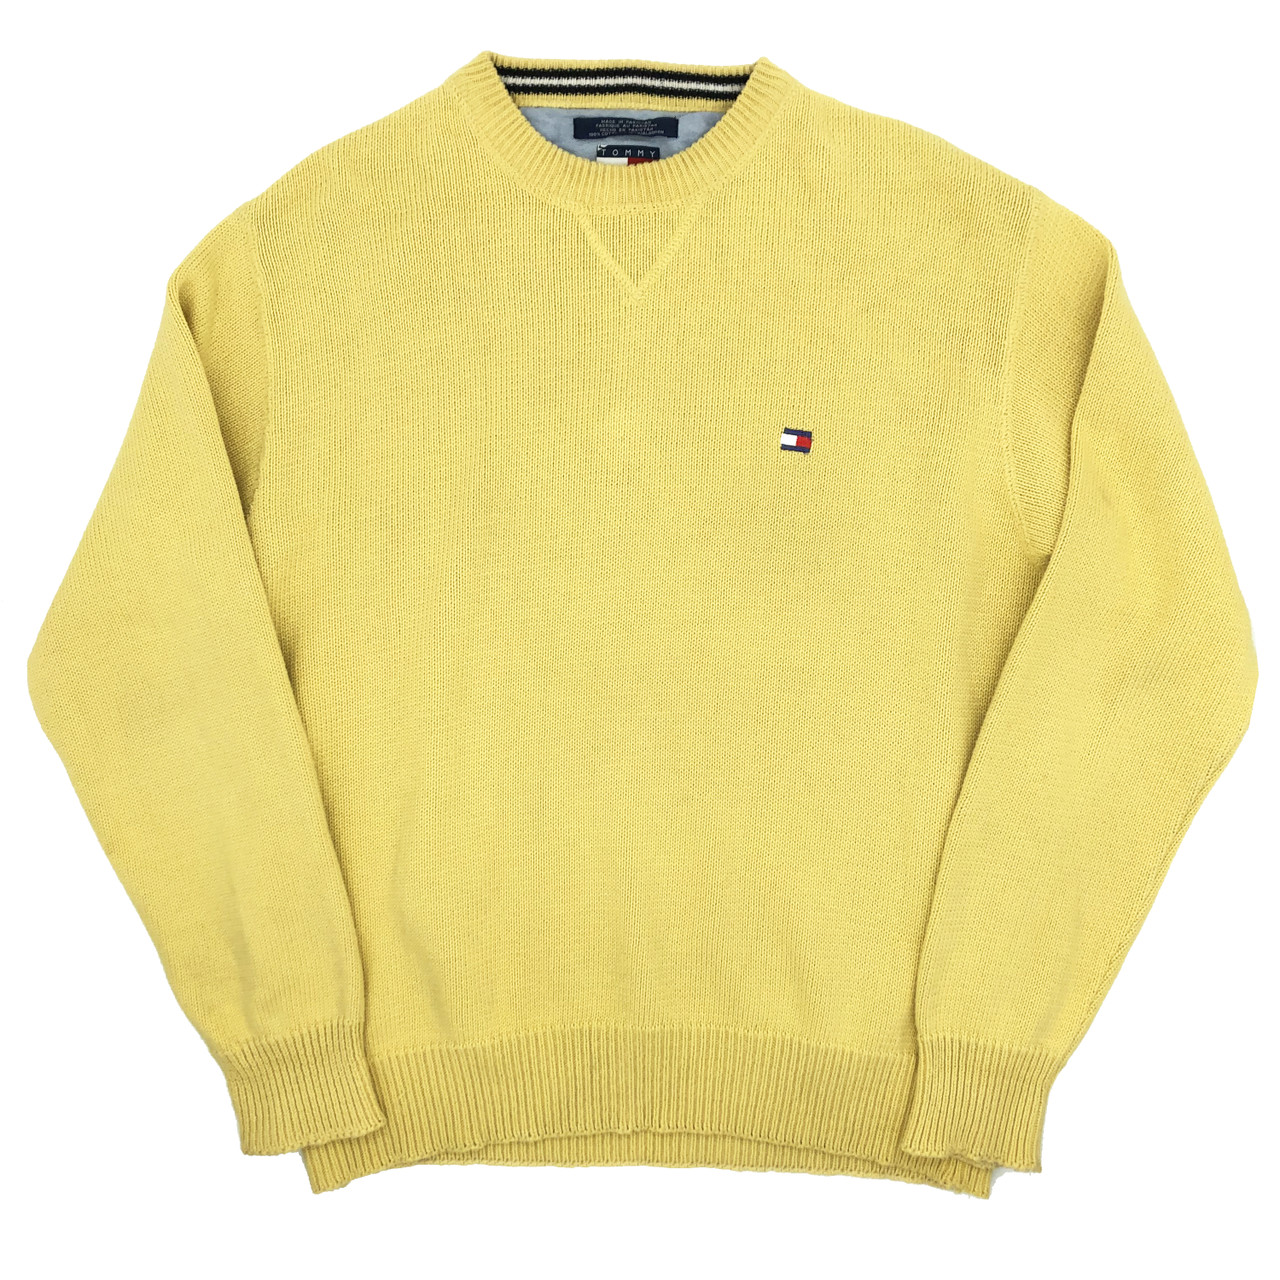 Vintage Tommy Hilfiger Yellow Knit 